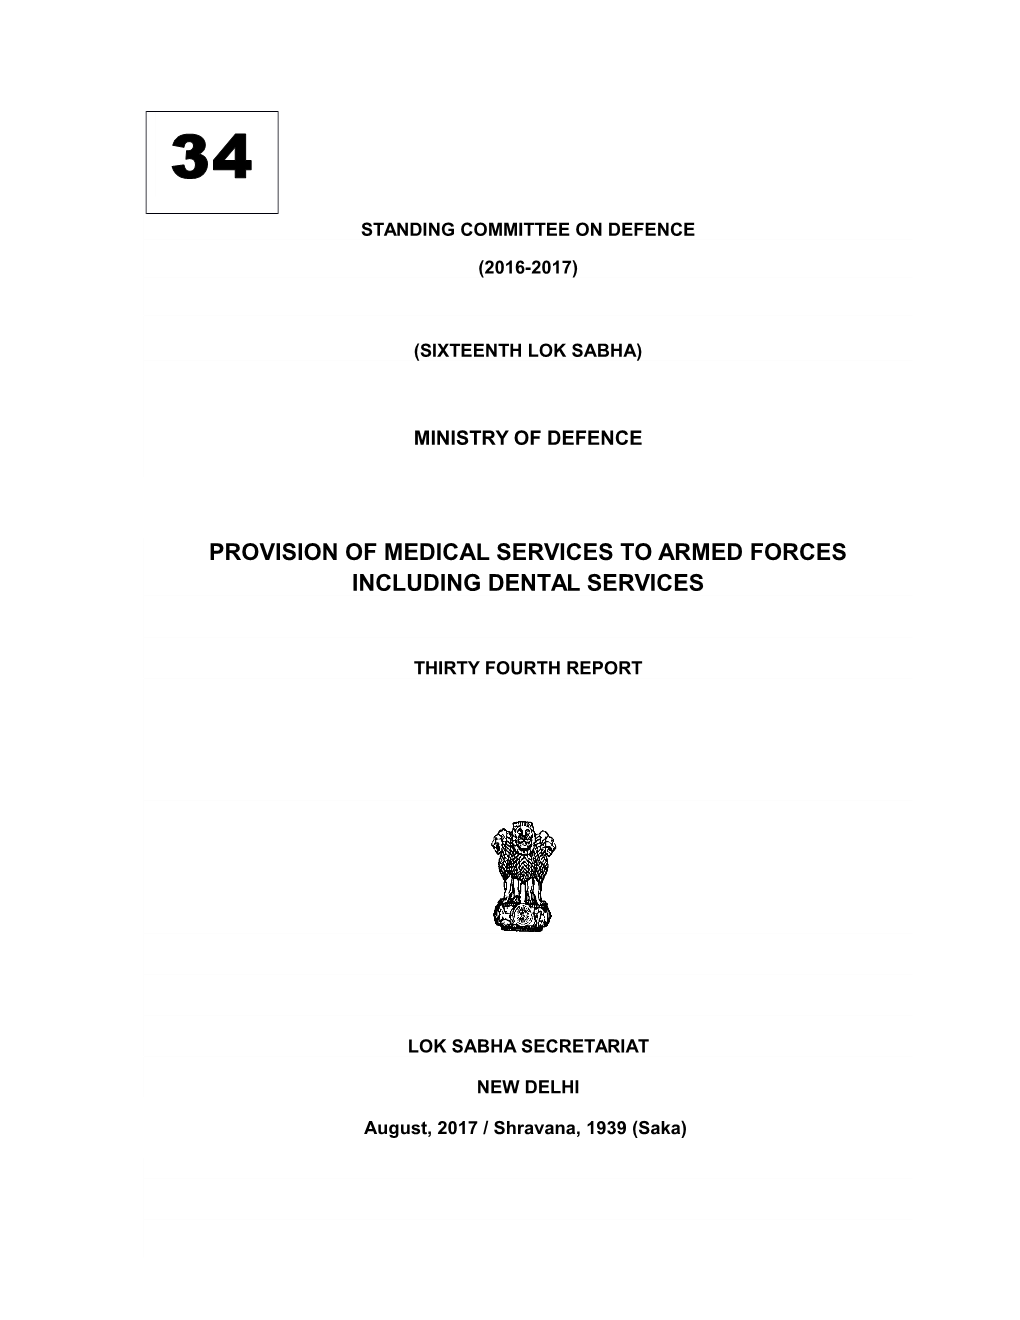 Provision of Medical Services to Armed Forces Including Dental Services